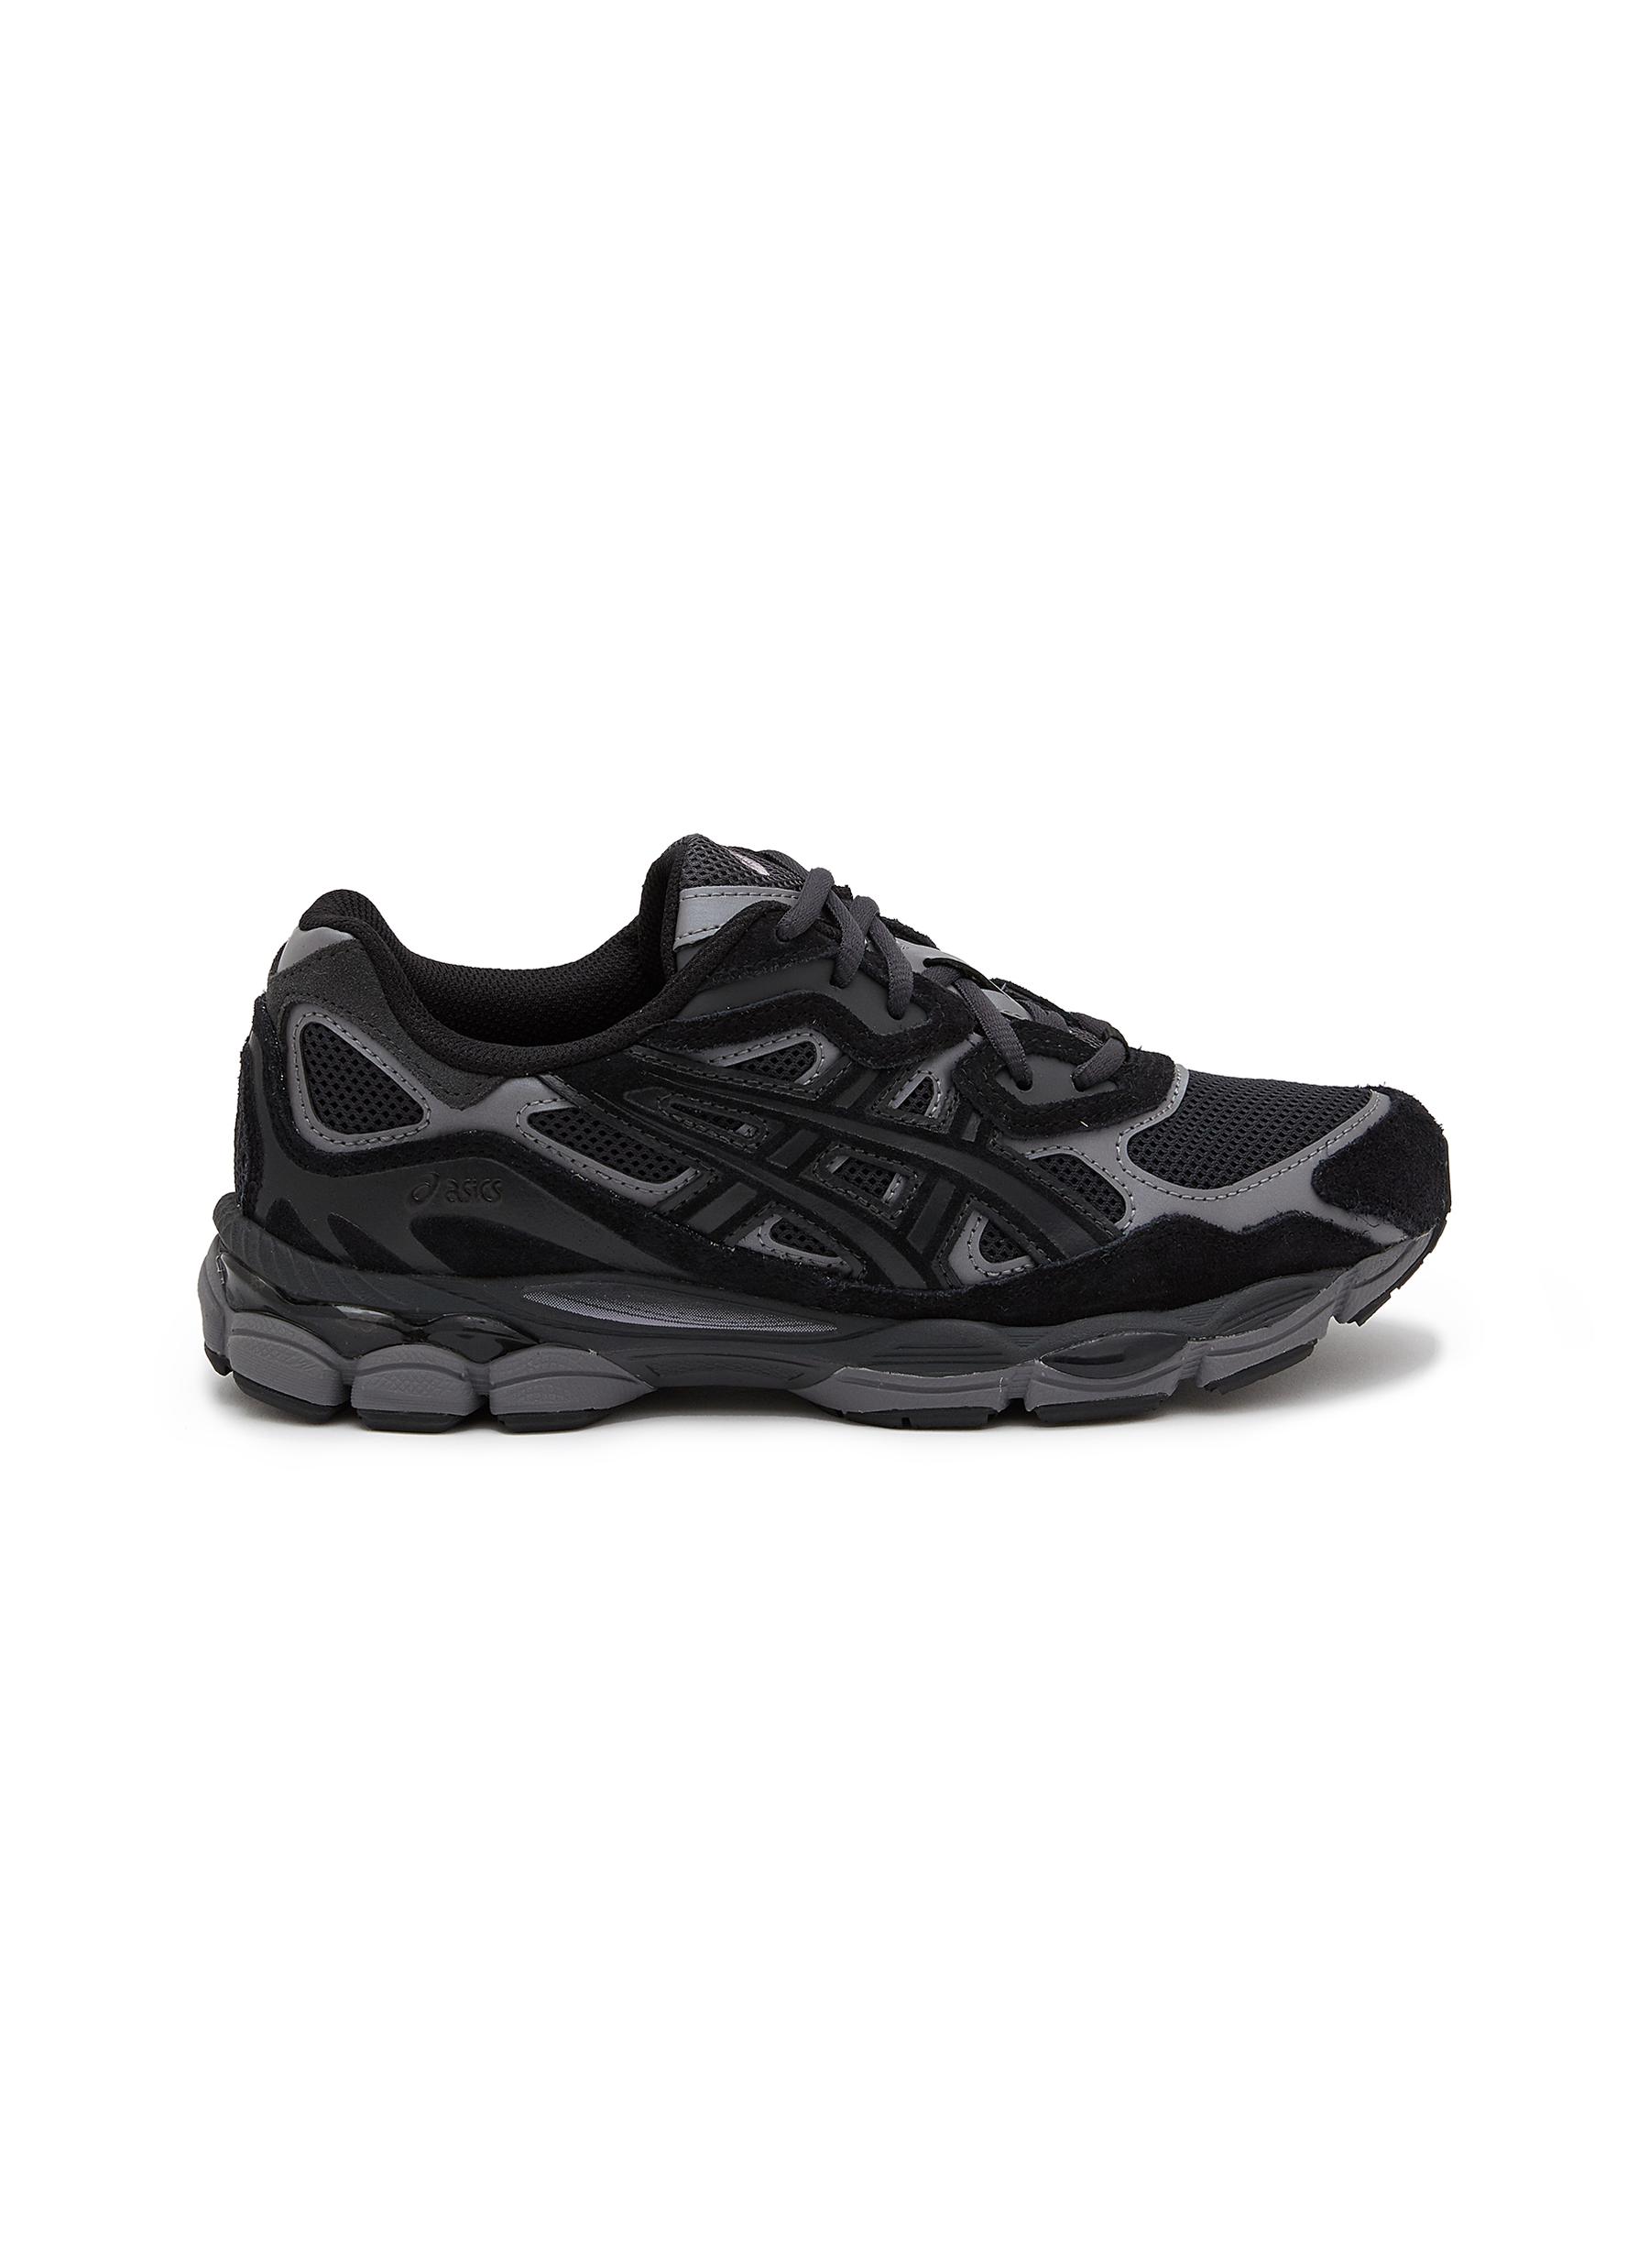 ASICS | GEL-NYC Low Top Lace Up Mesh Sneakers | BLACK | Women